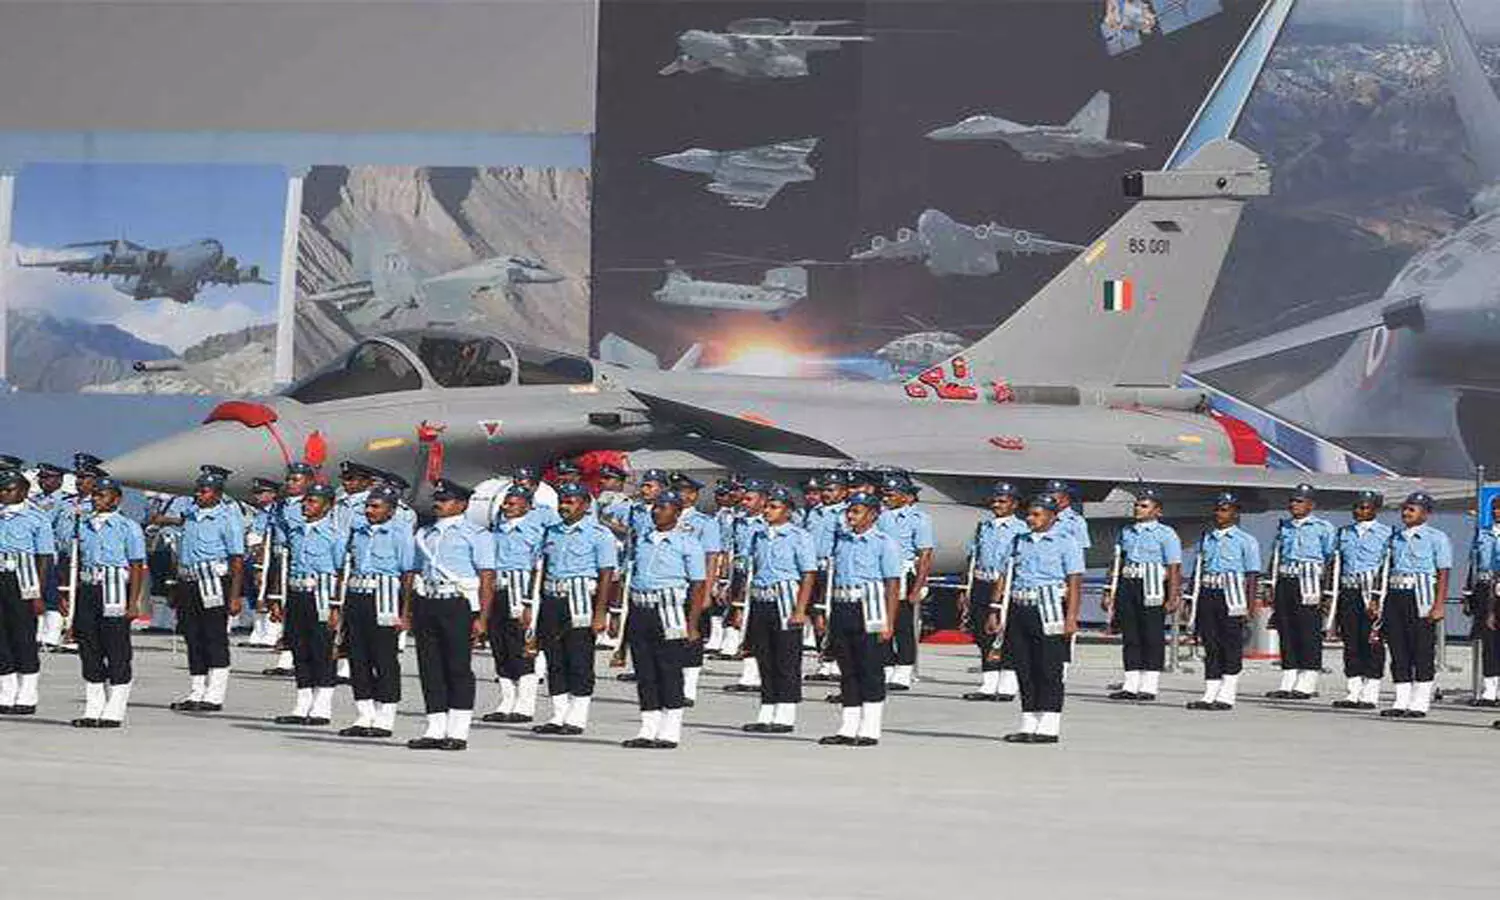 Indian Air Force Recruitment 2021: Vacancies for several posts, check eligibility & other details